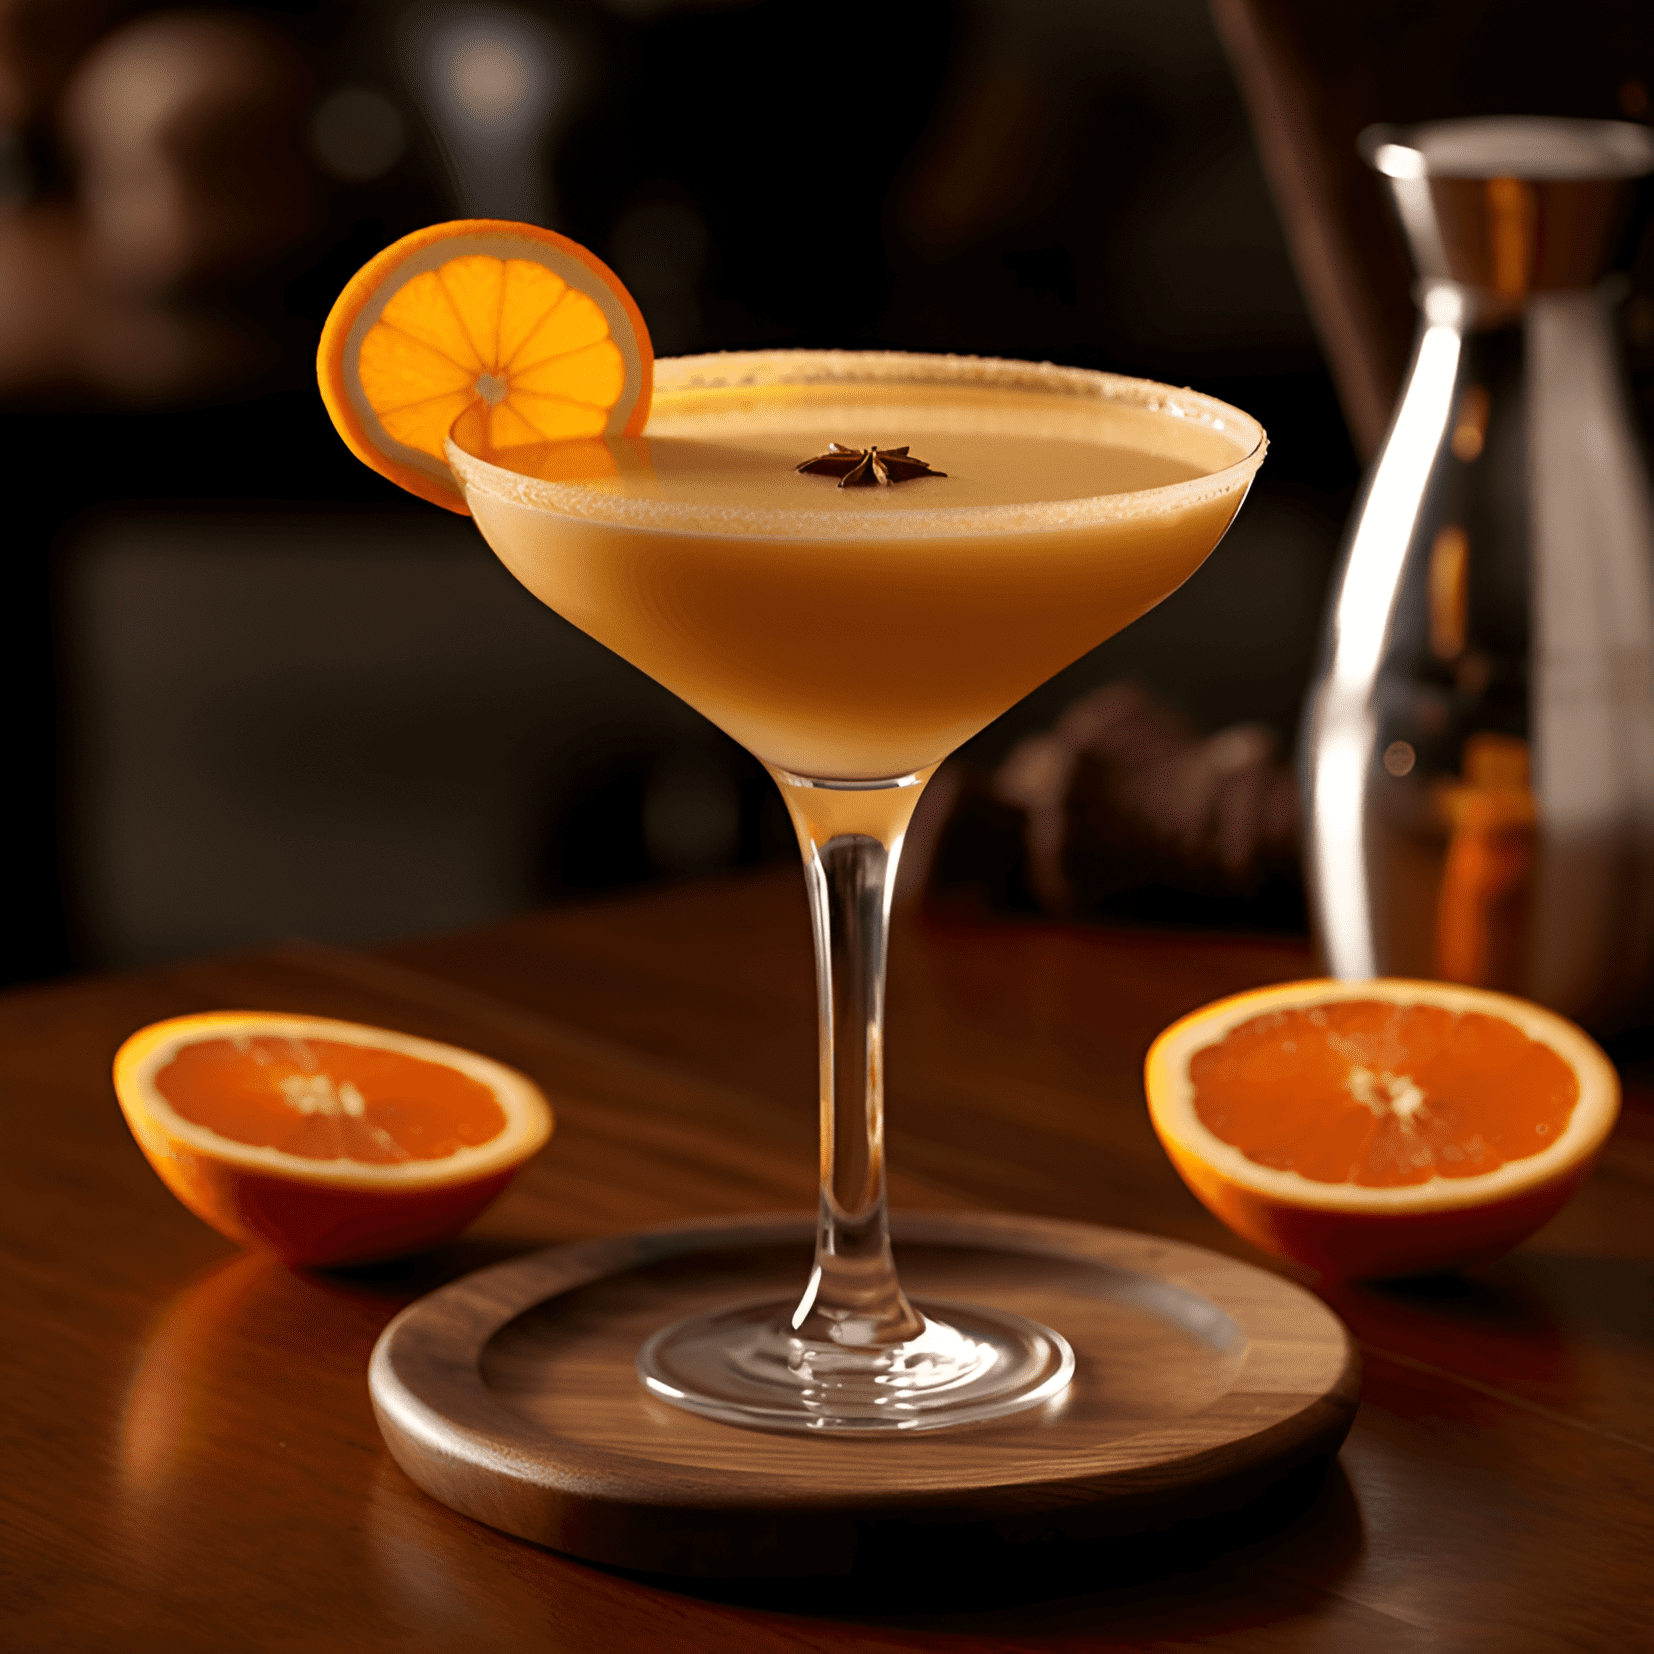 Orange Flip Cocktail Recipe - The Orange Flip has a creamy, smooth texture with a balanced sweetness and a hint of tartness from the orange. It is a rich, velvety drink with a frothy finish and a subtle warmth from the alcohol.